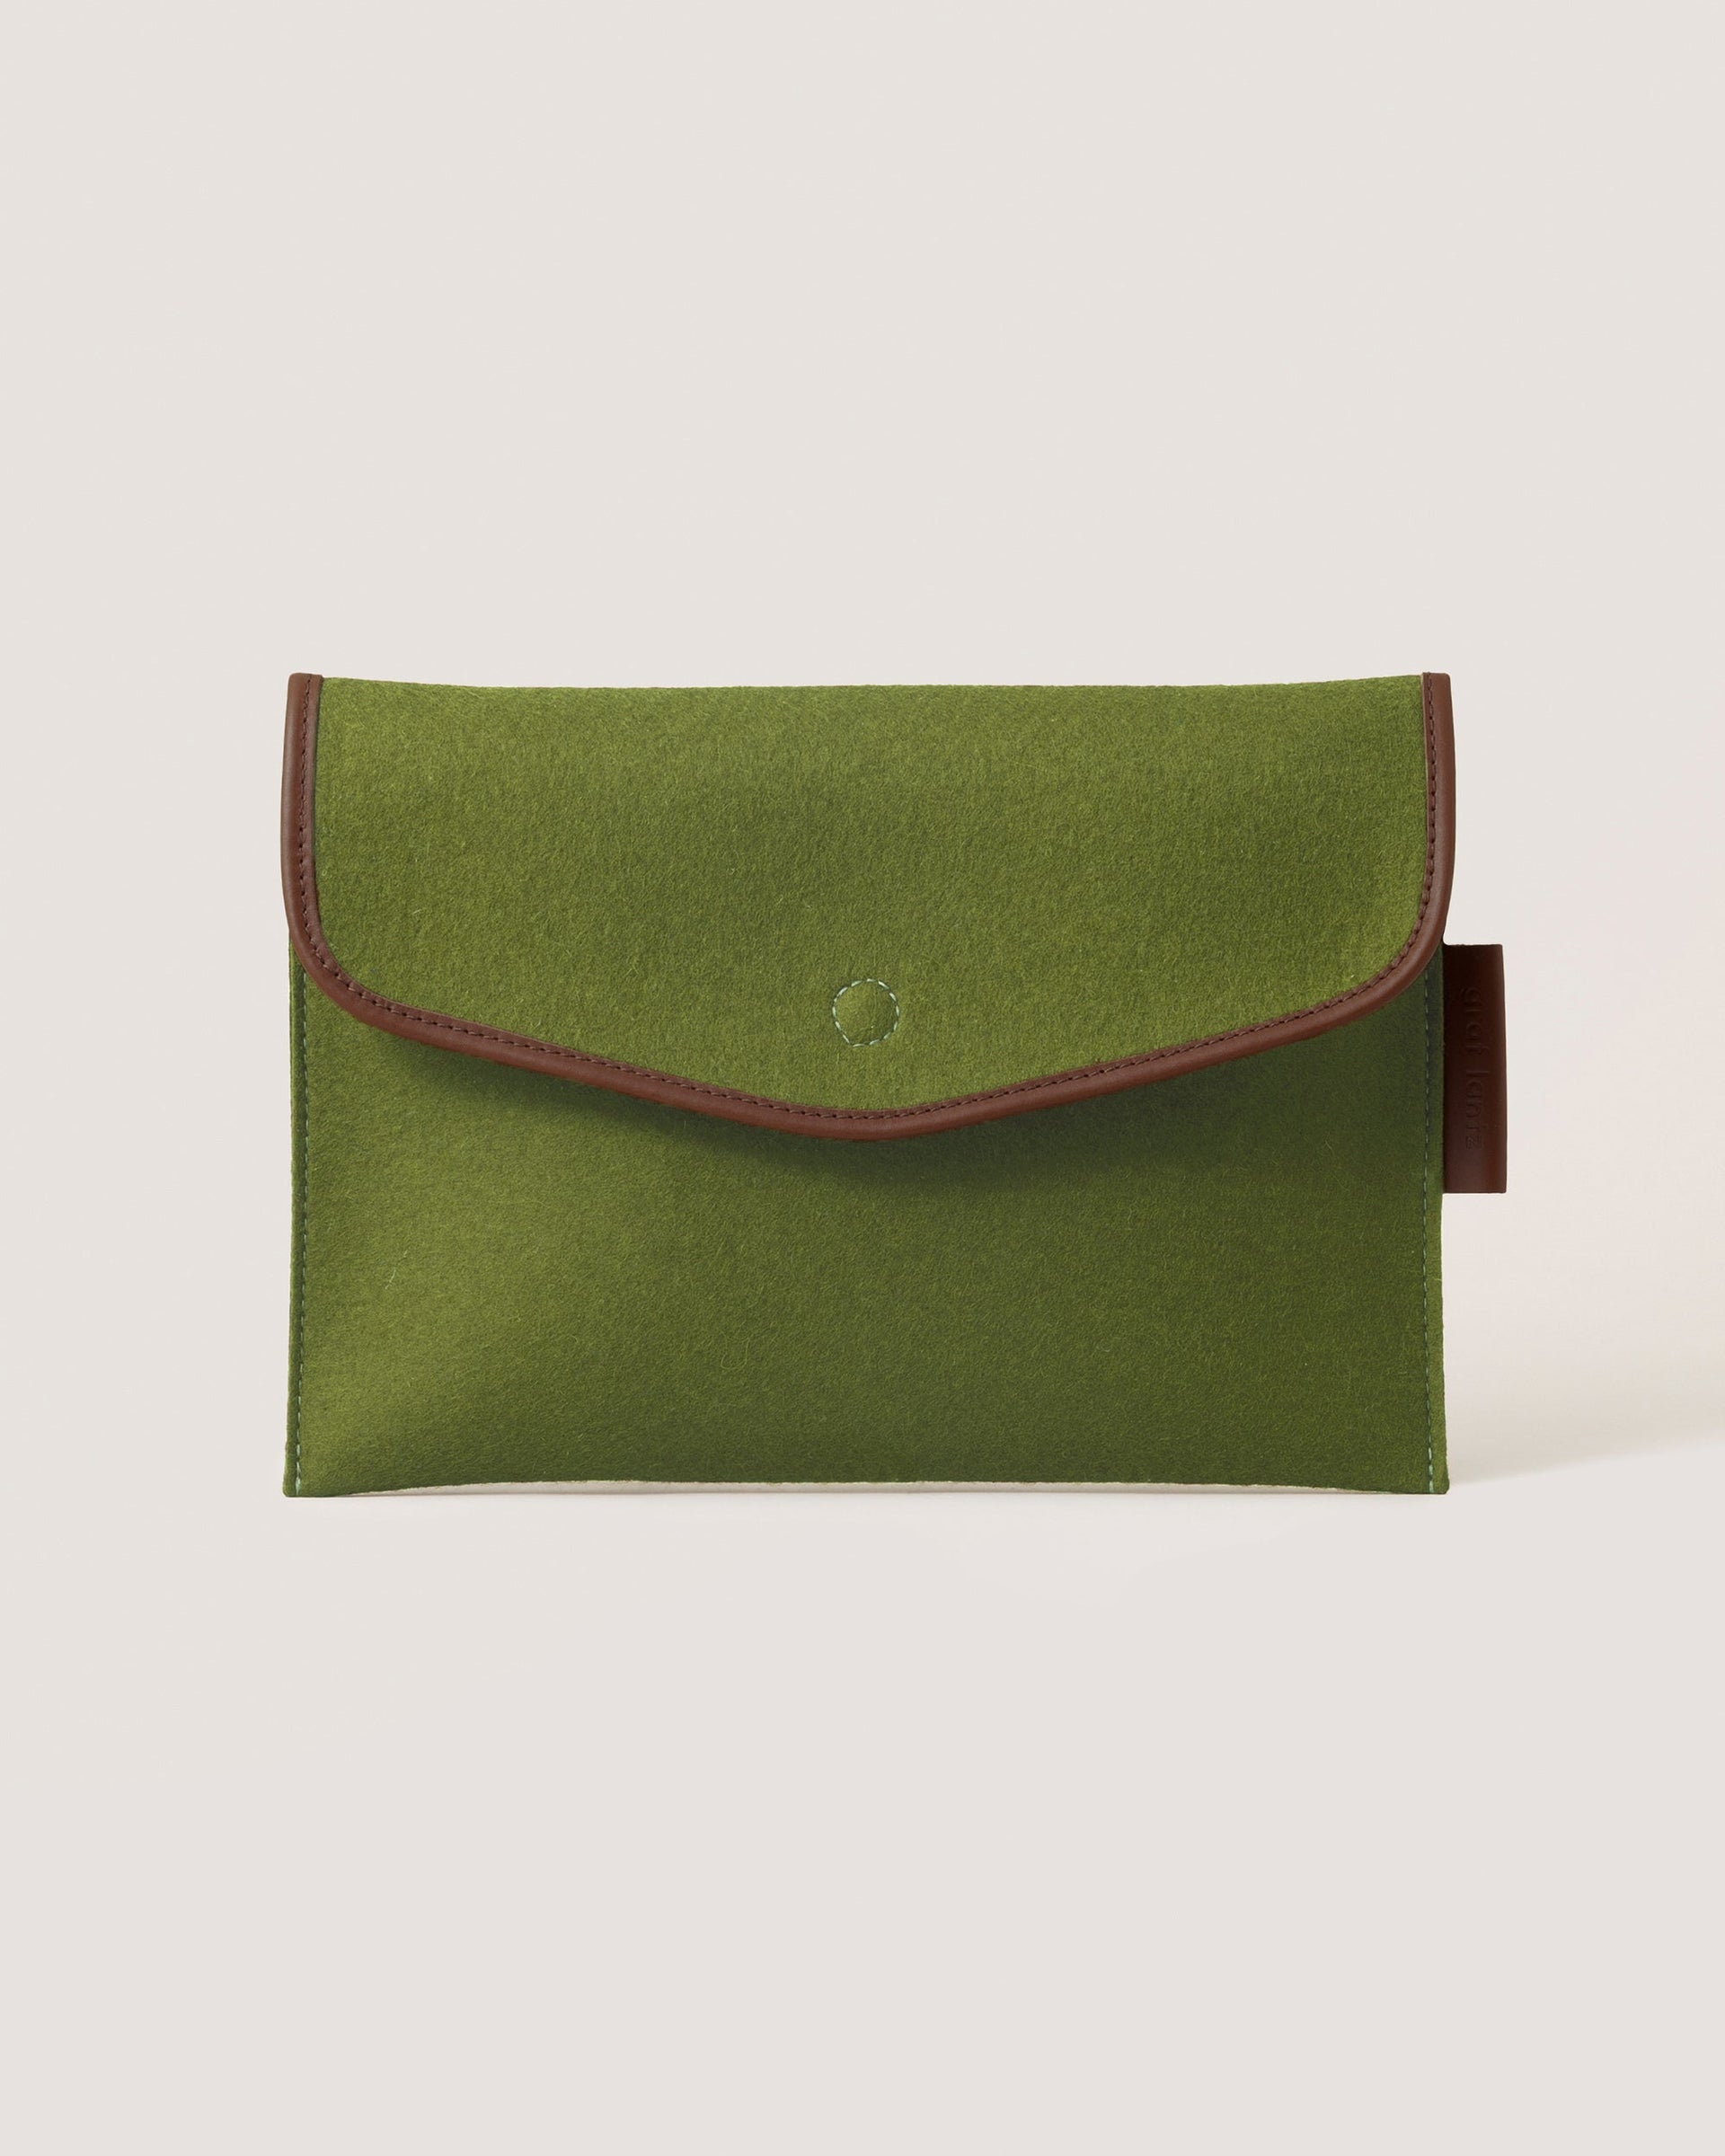 Envelope Merino Wool 14" Tech Sleeve in moss color with dark brown leather application by Graf Lantz, front view